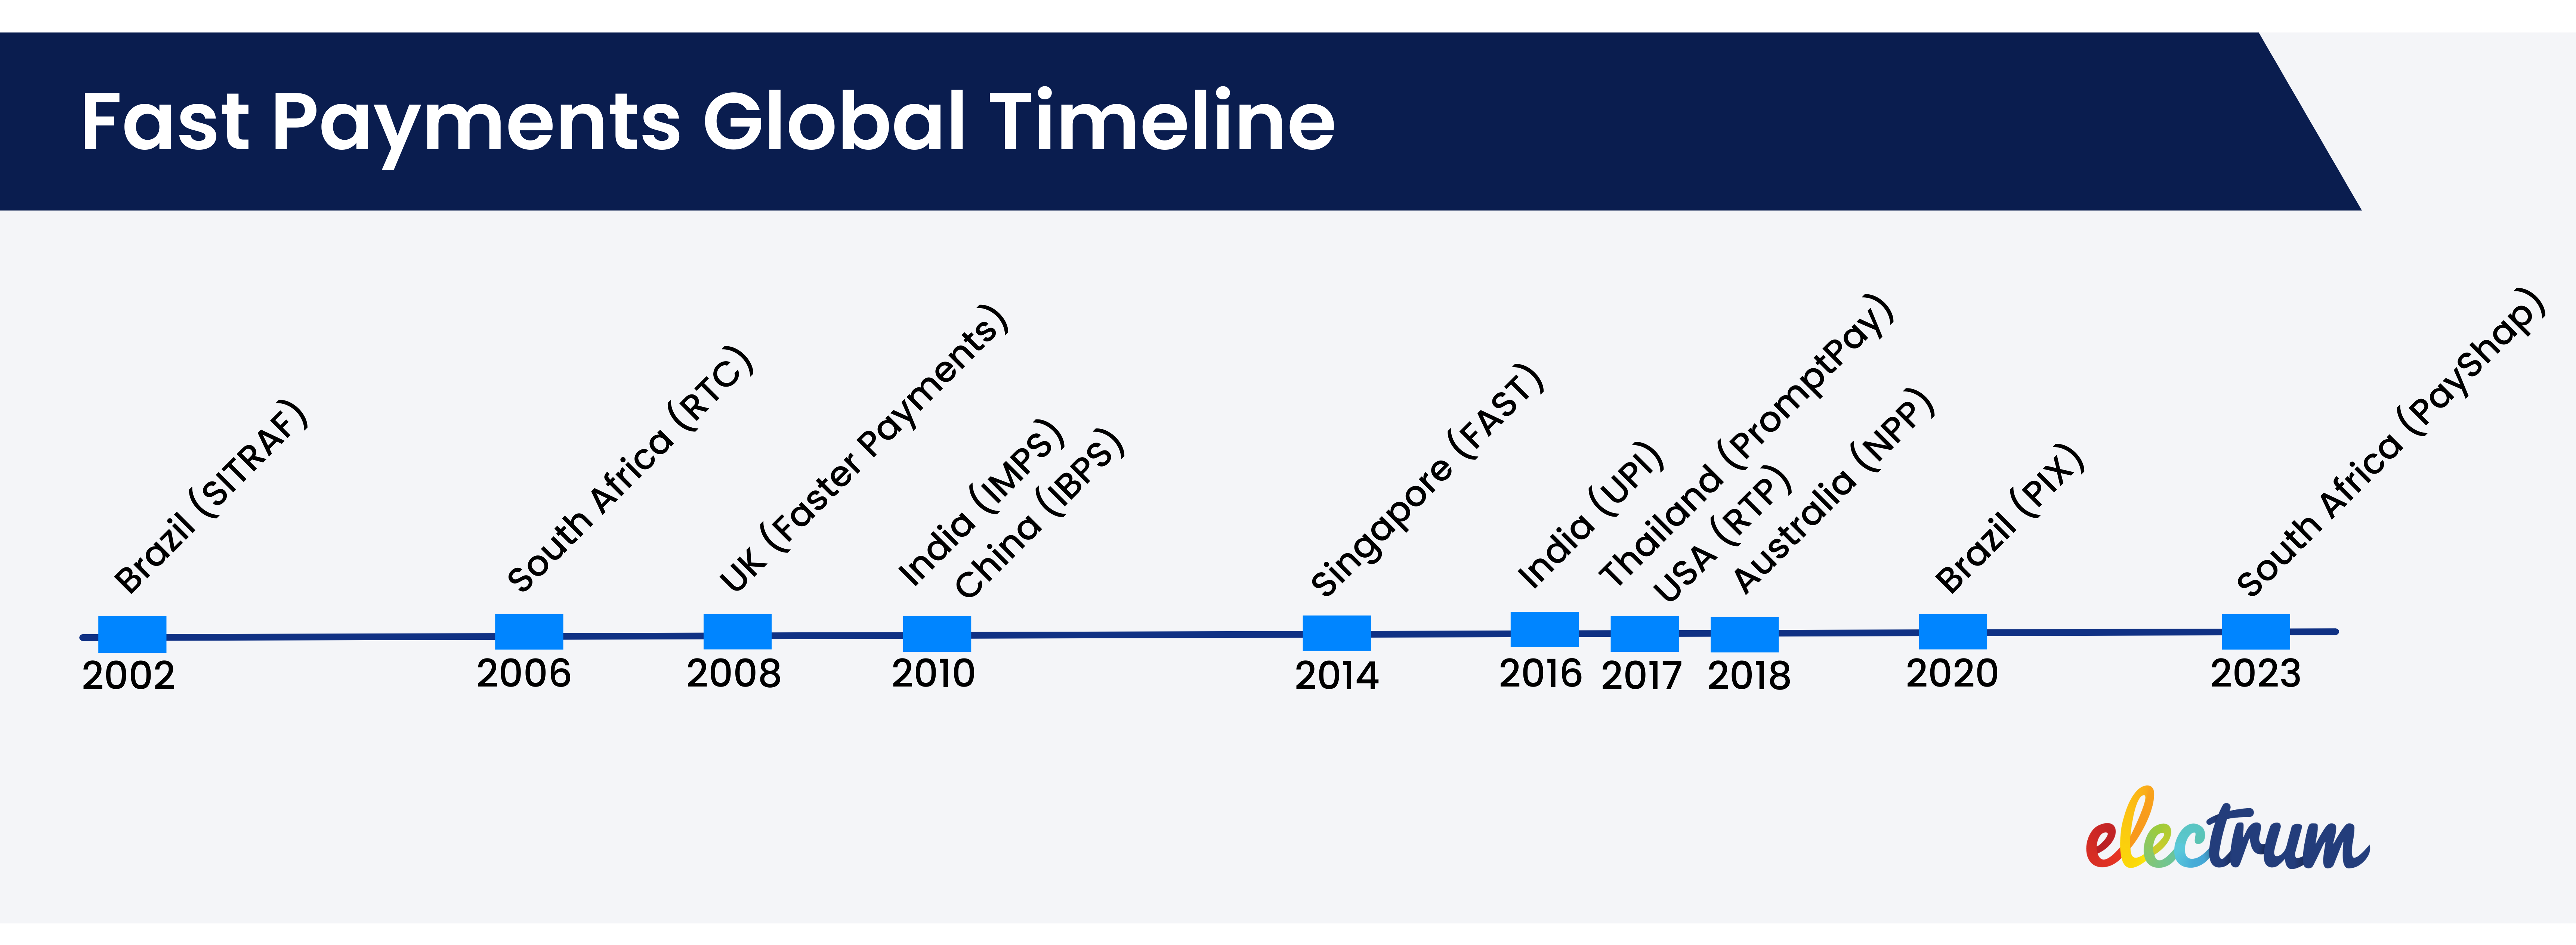 A timeline of significant milestones in global fast payment systems